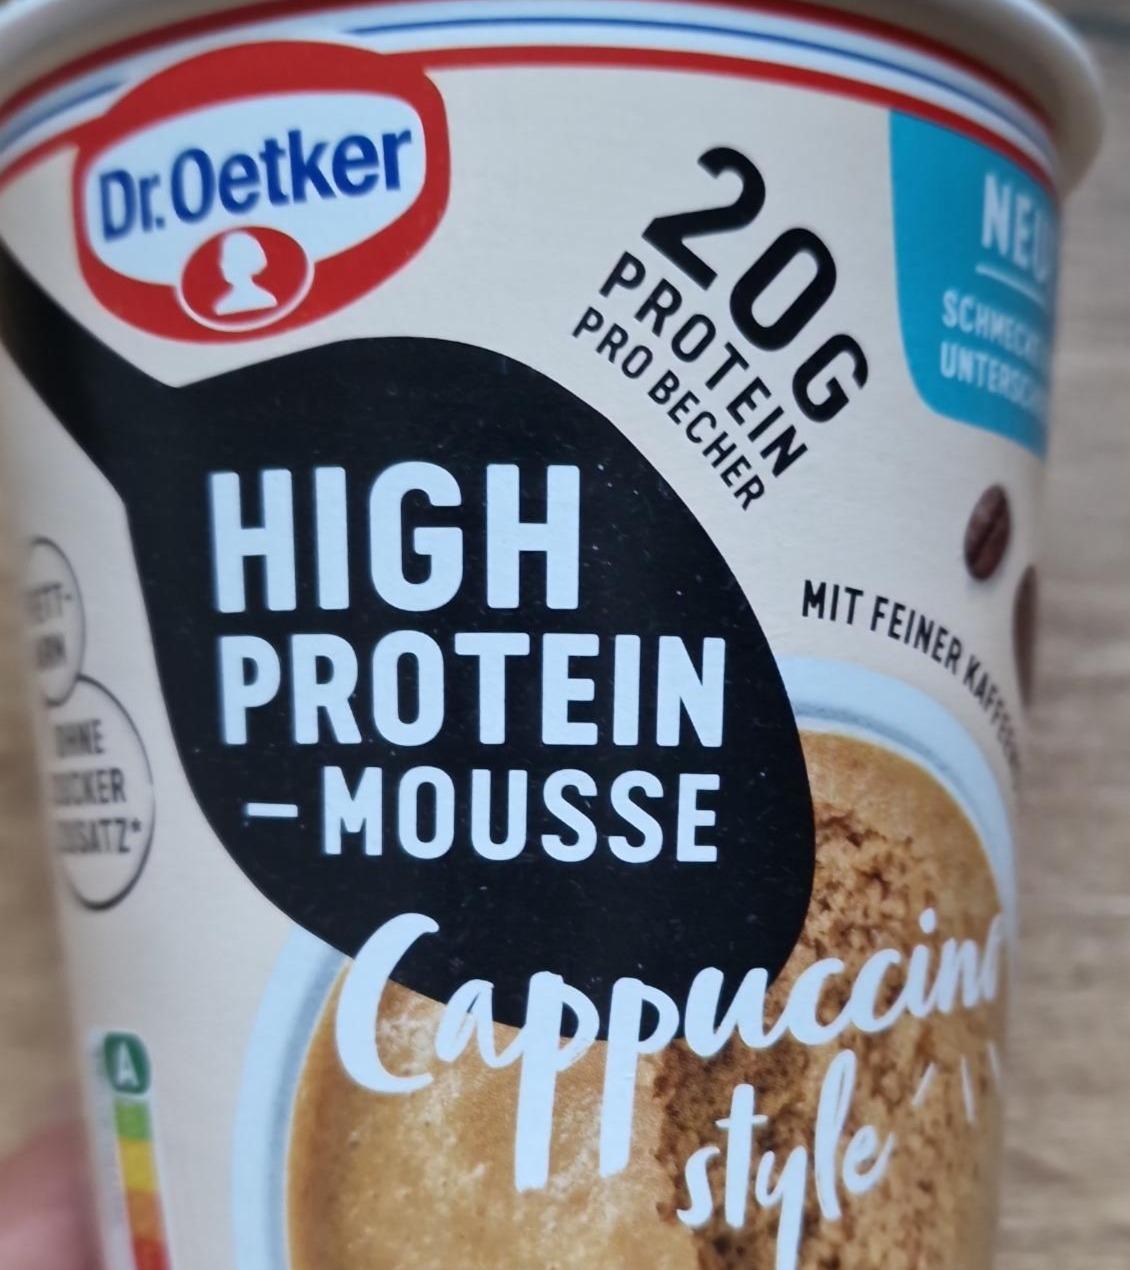 Fotografie - High Protein-Mousse Cappuccino style Dr.Oetker